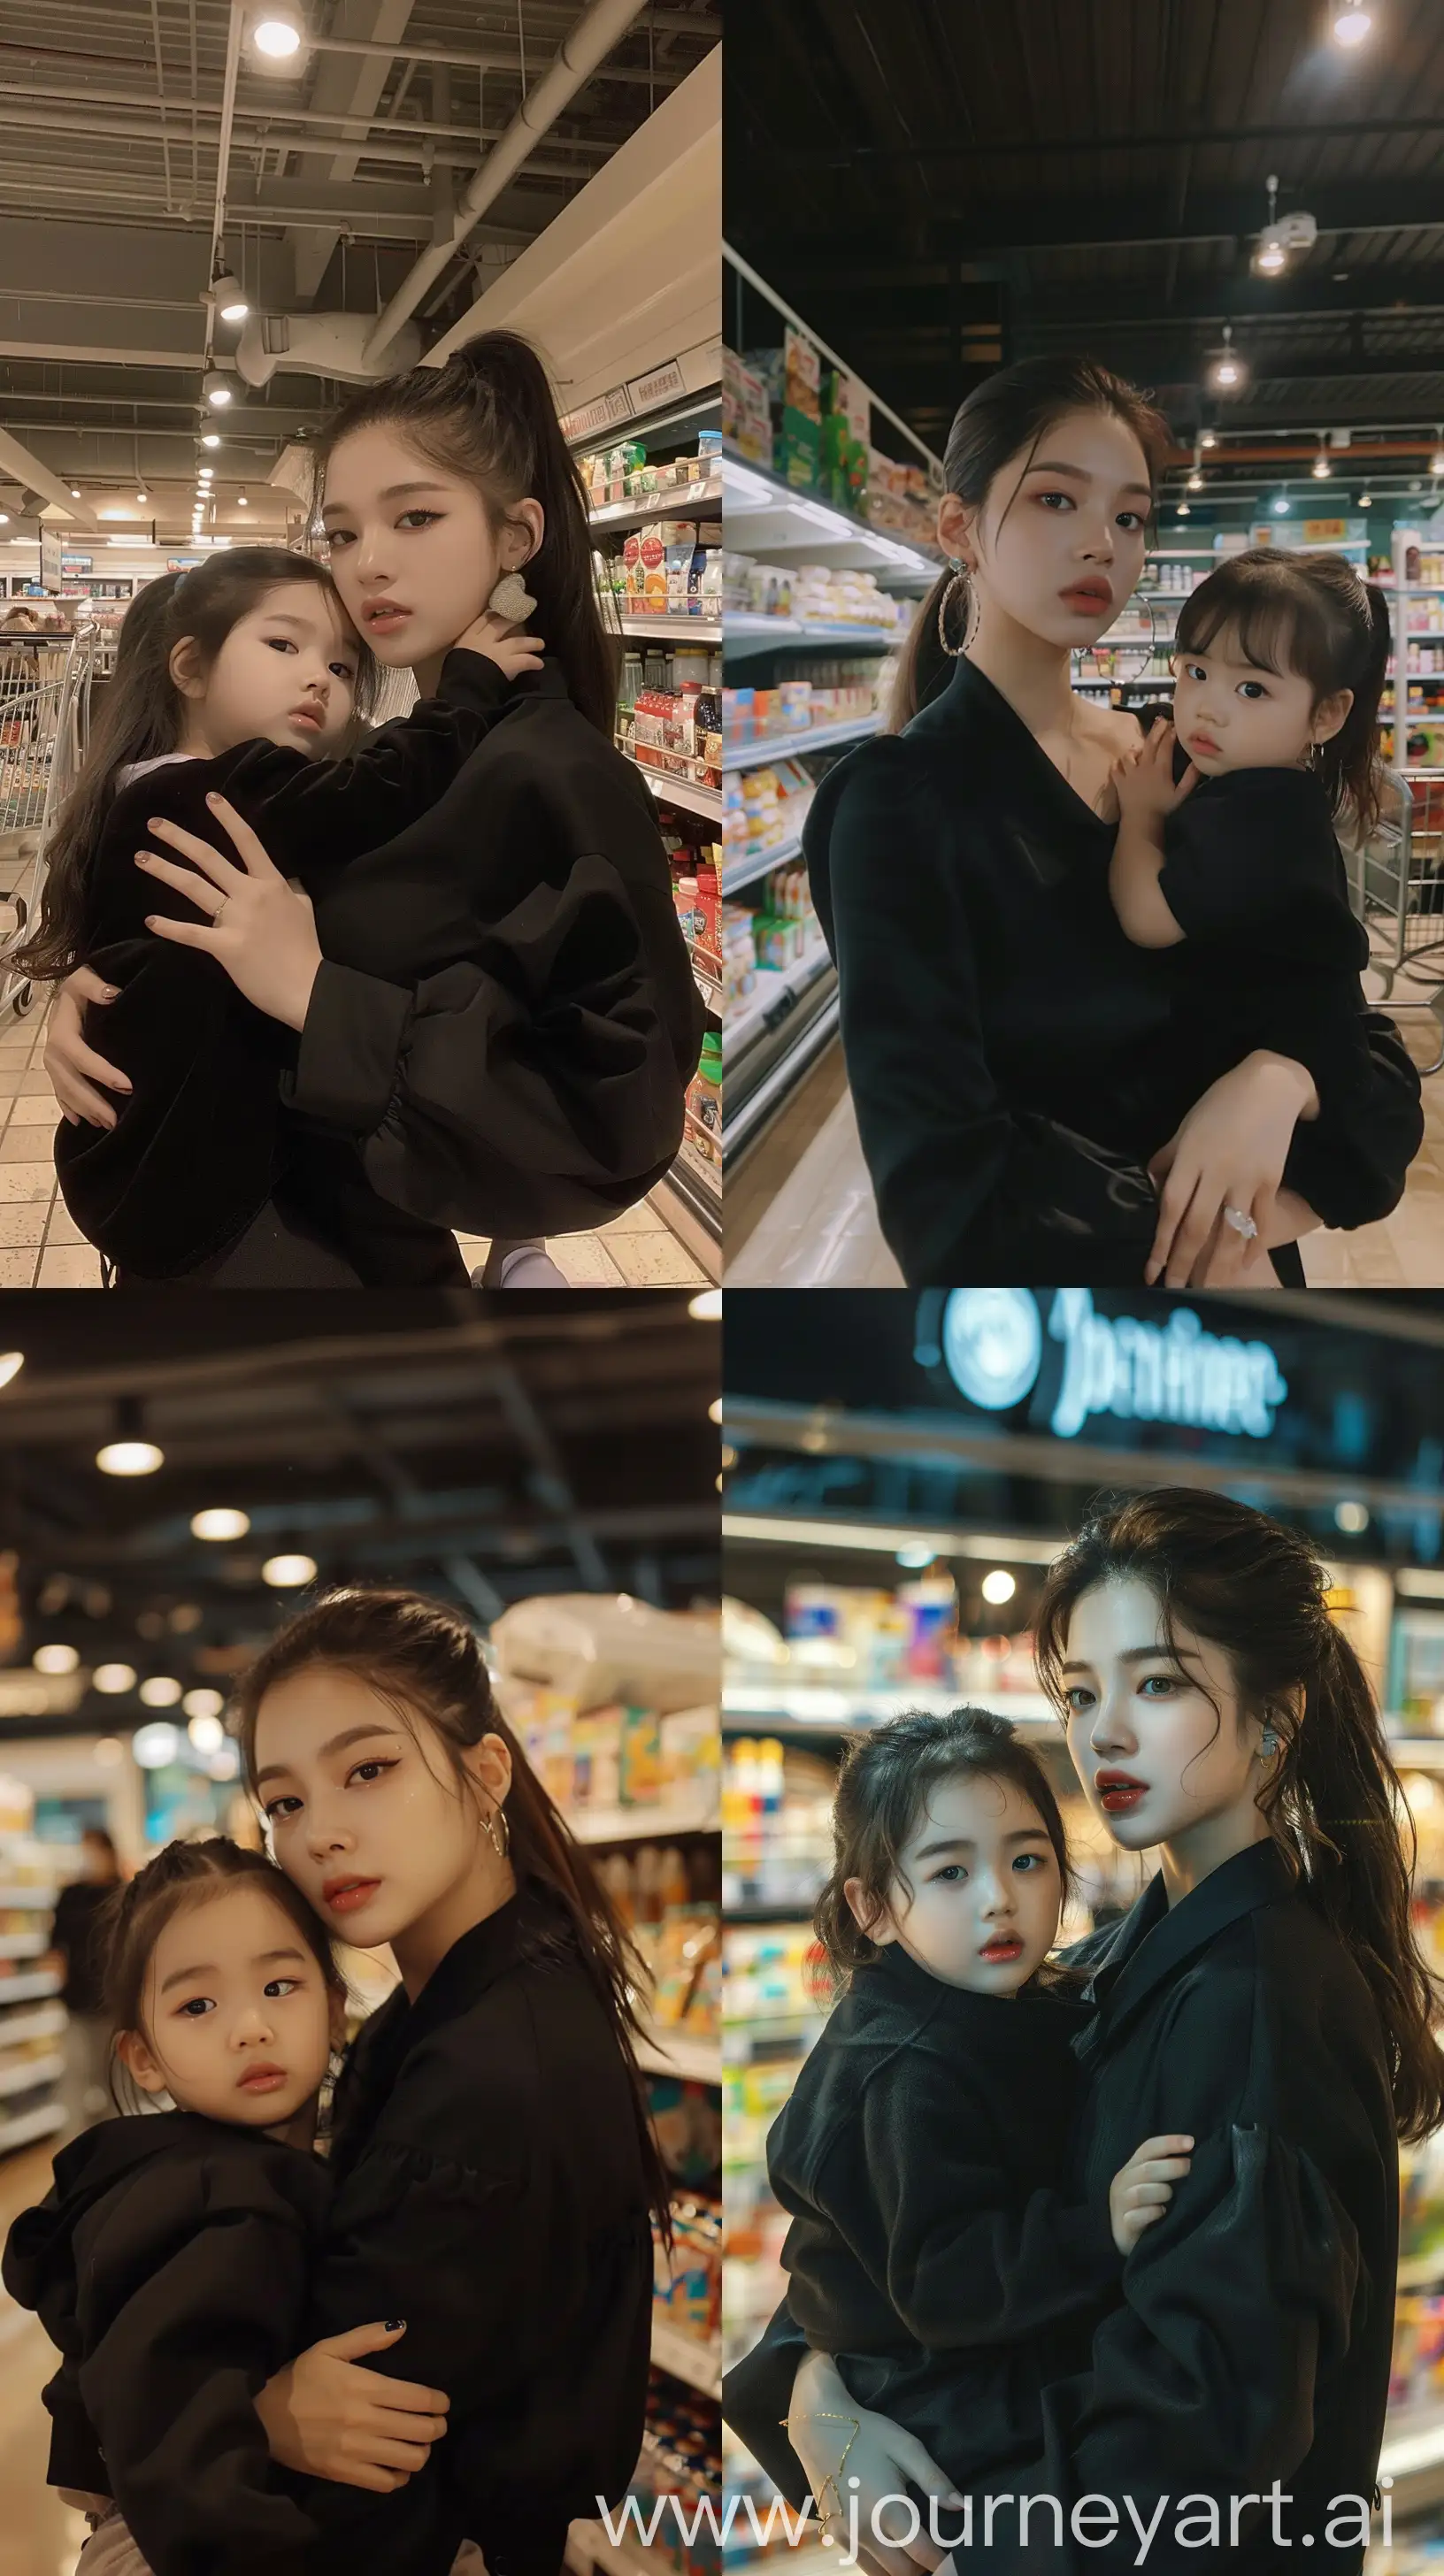 blackpink's jennie holding 2 years old  girl, facial feature look a like blackpink's jennie, wearing black outfit, night times, aestethic make up,hotly elegant young mom, profile,inside a grocery store --ar 9:16 